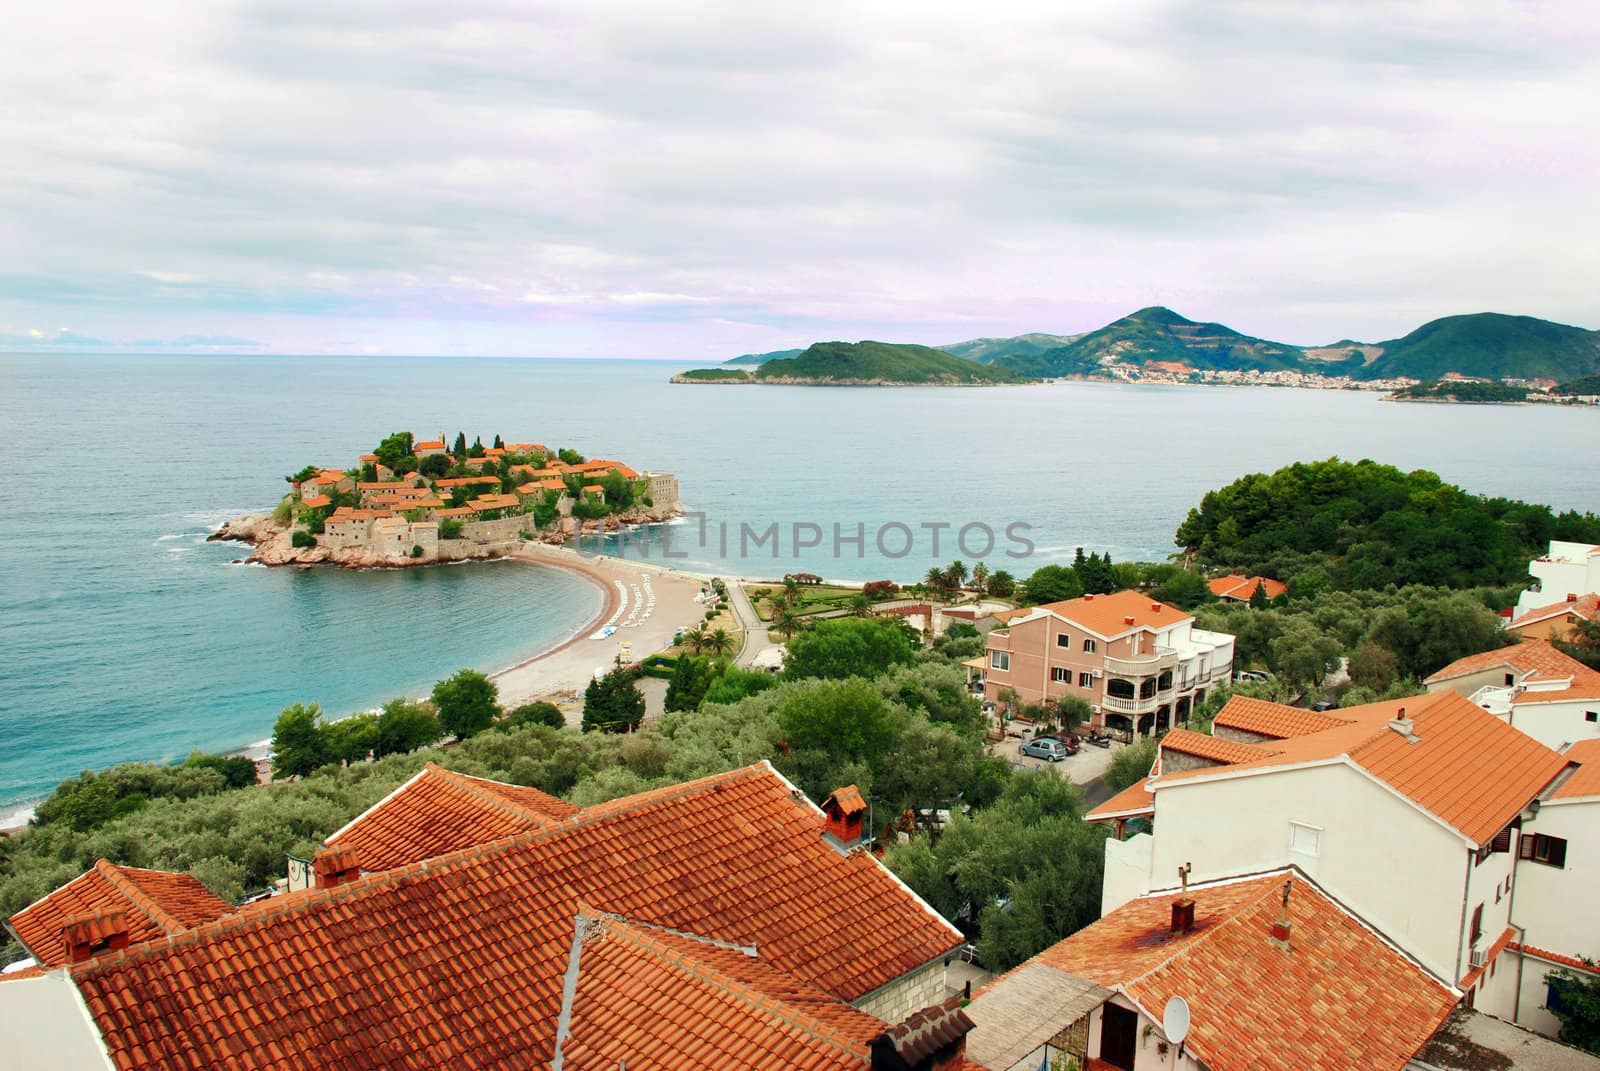 Island in Adriatic sea by simply